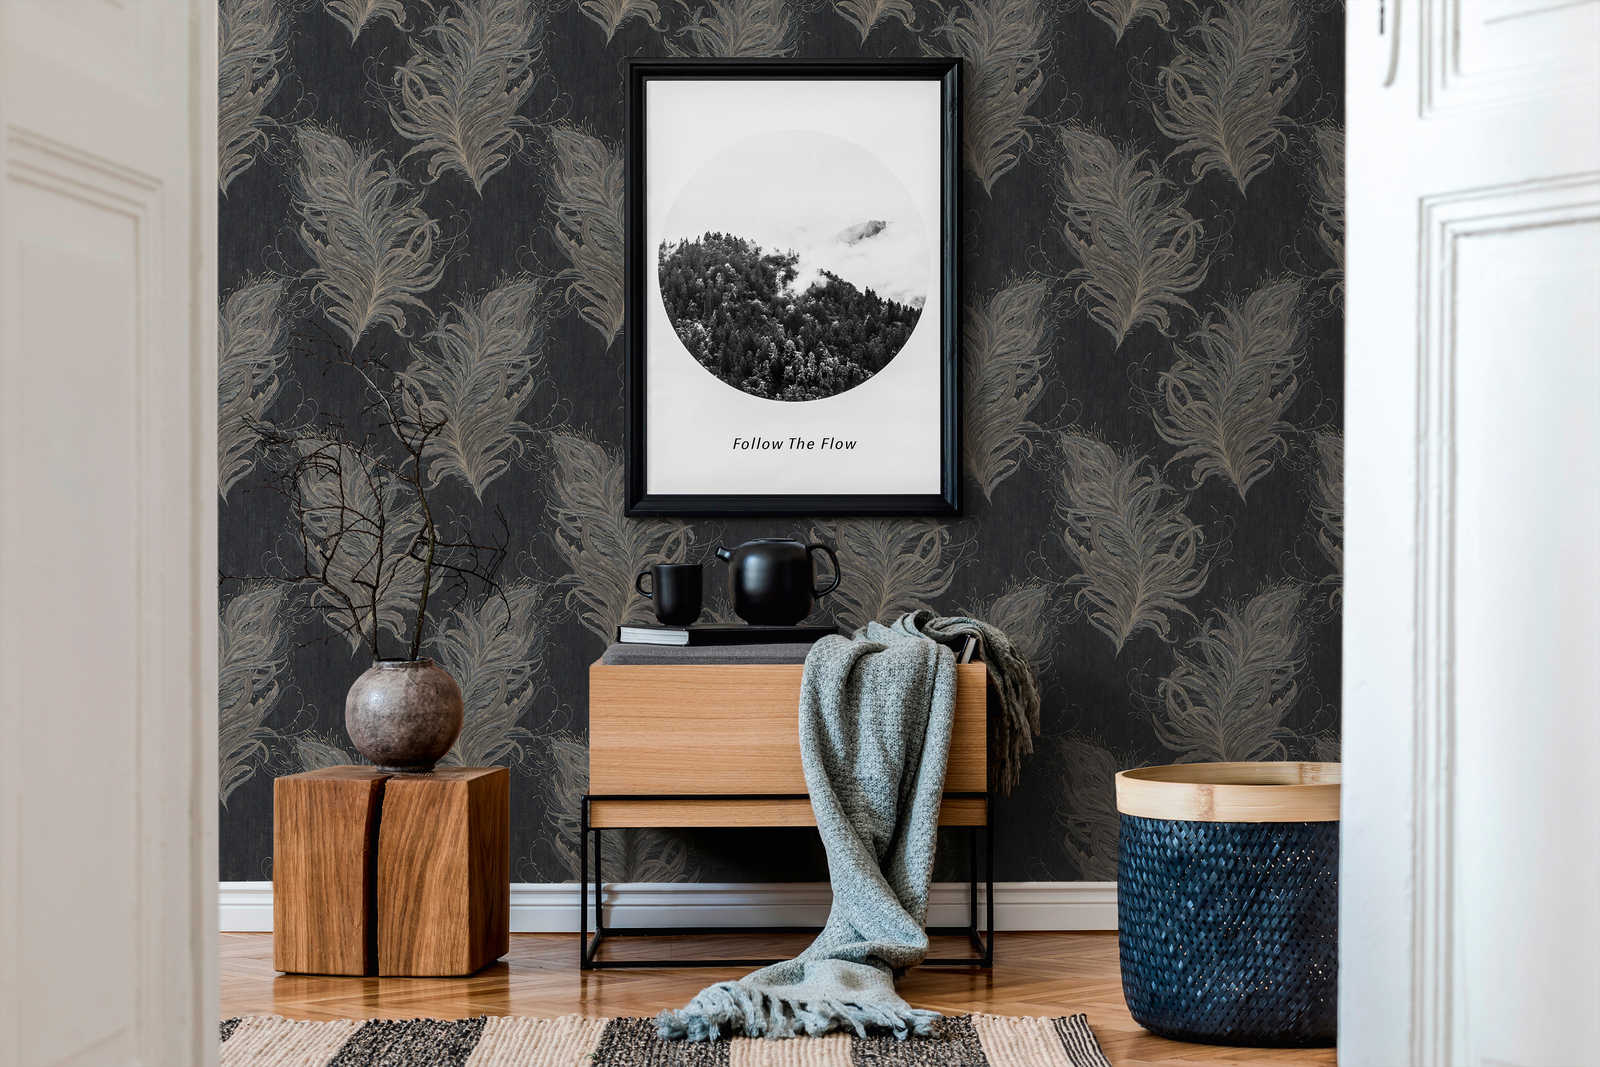             Black non-woven wallpaper with feathers in metallic colours
        